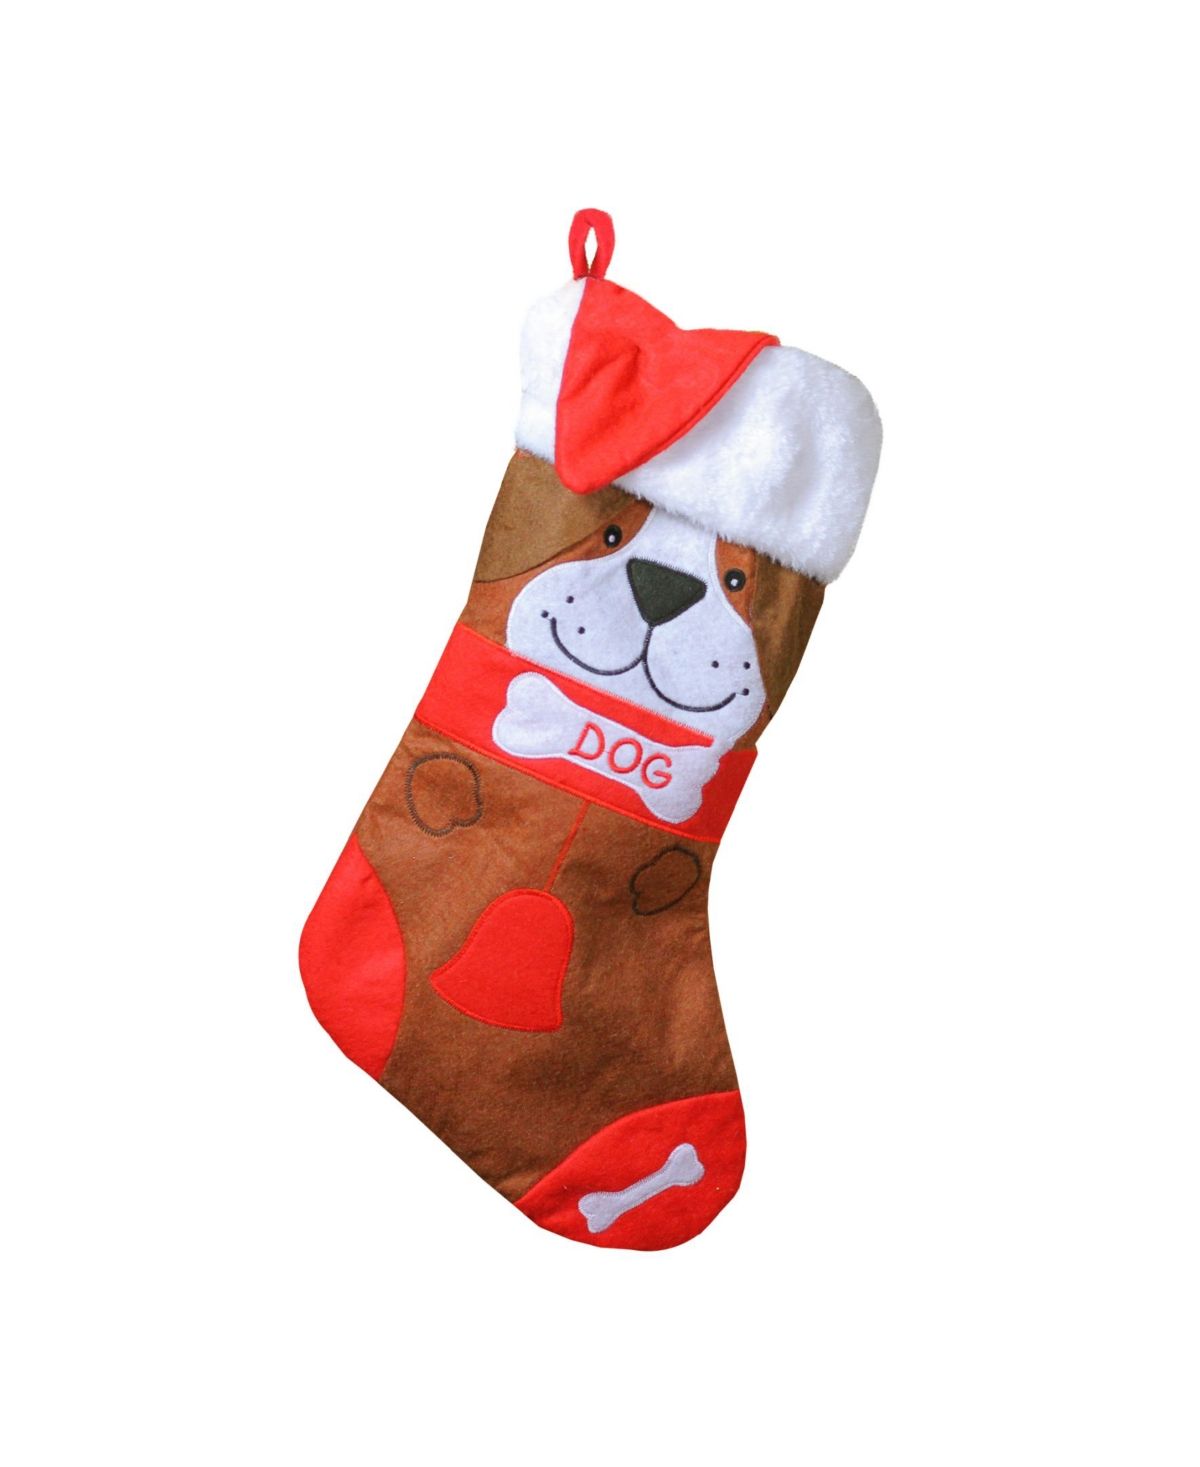 Northlight 17" Red and Brown Embroidered "Dog" Christmas Stocking with White Cuff | Macys (US)